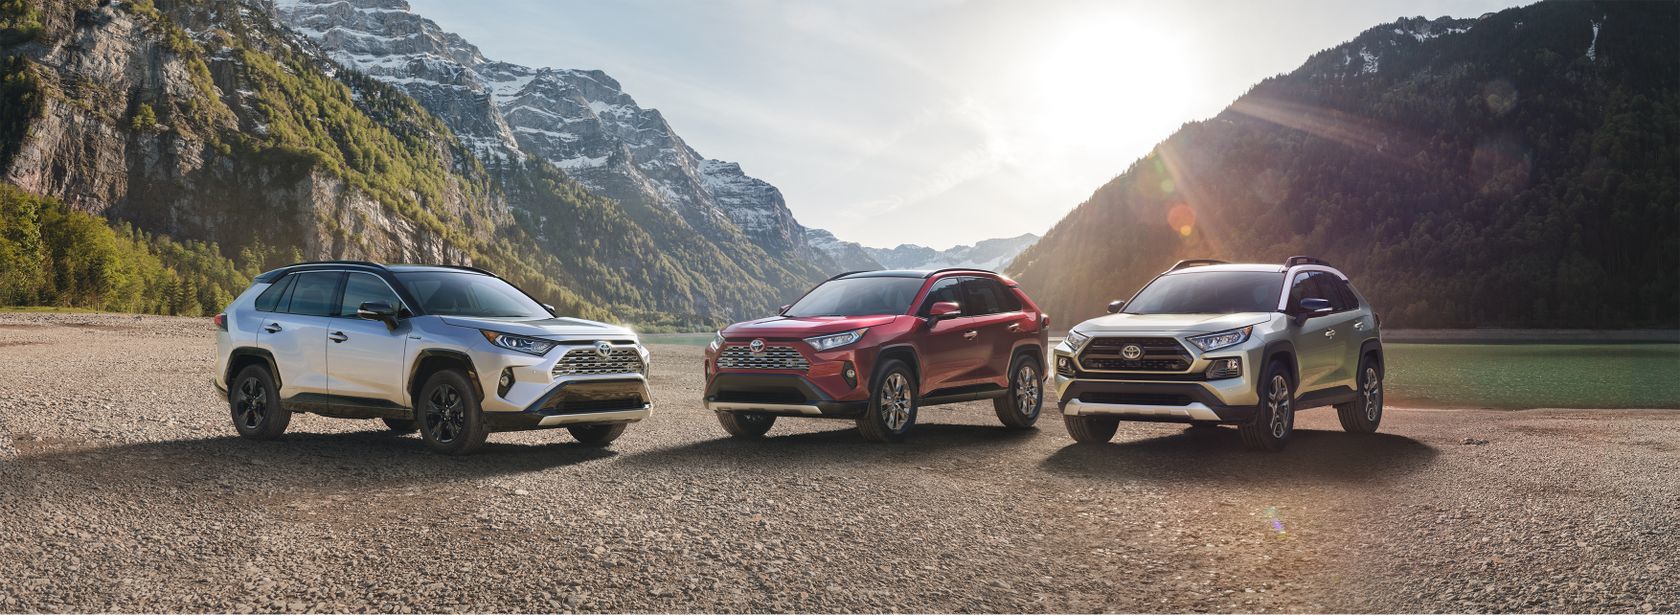 The new 2019 Toyota RAV4 soon available at Longueuil Toyota